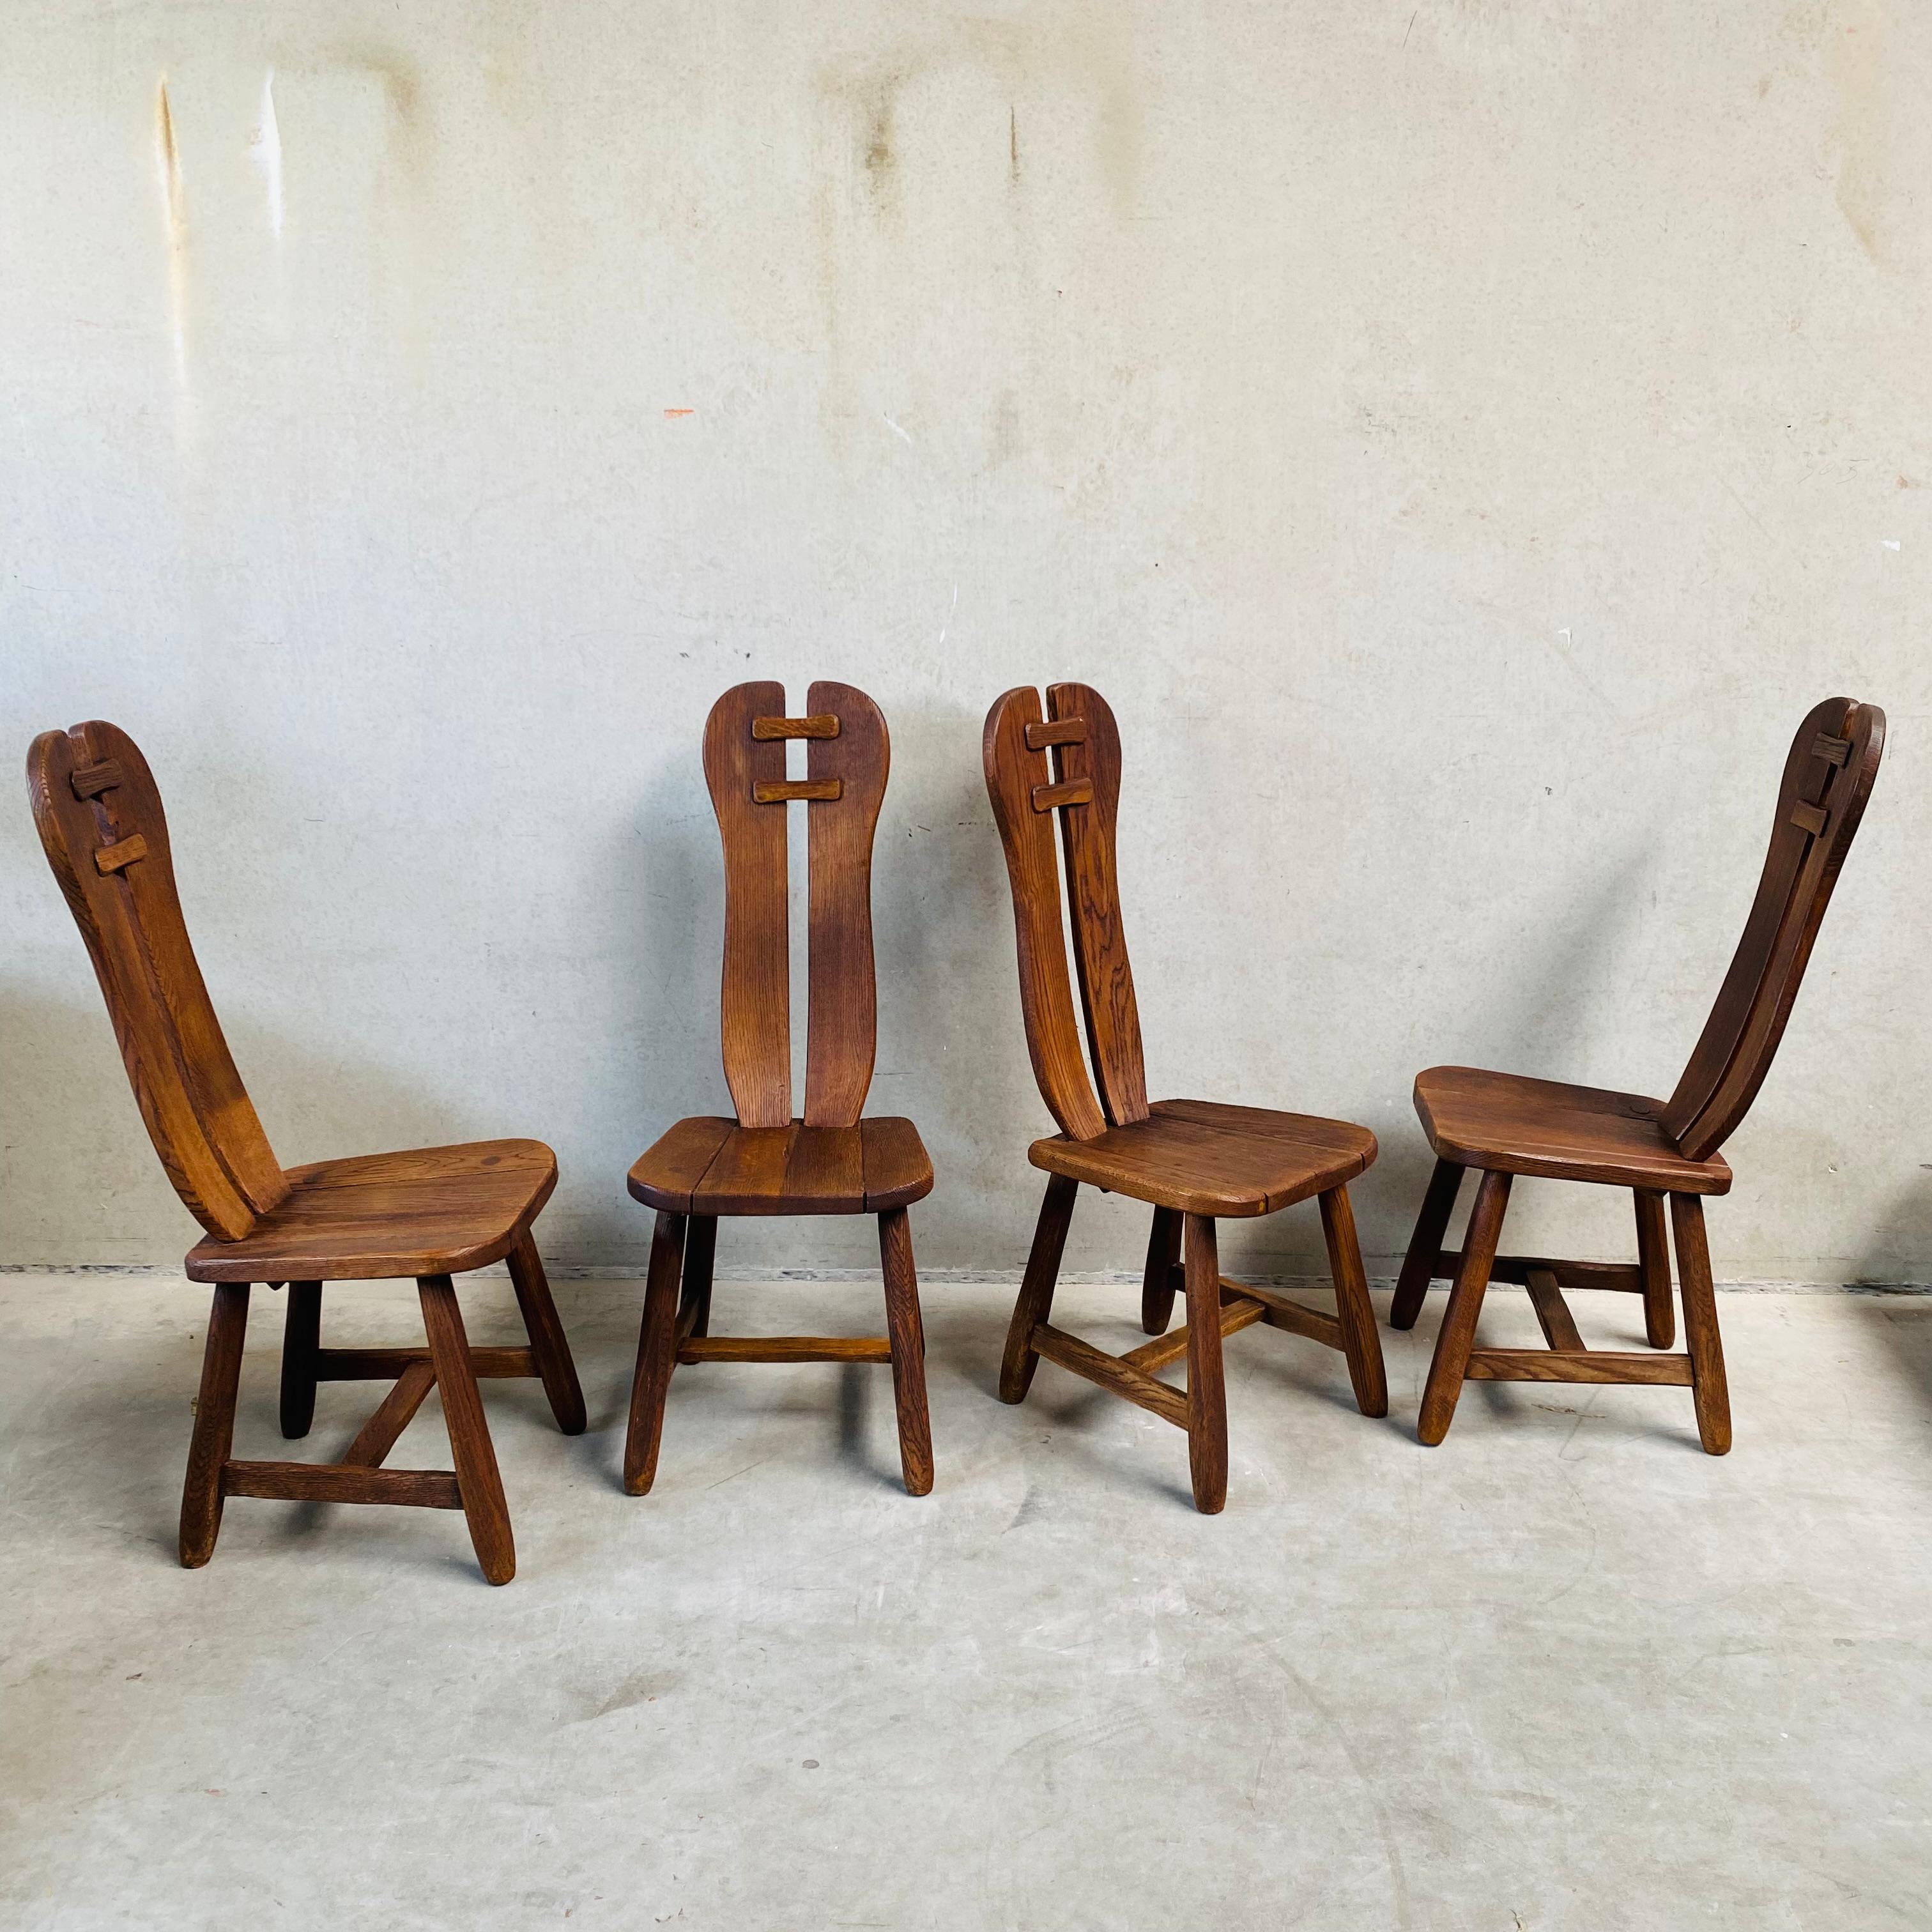 Looking for unique and stylish dining chairs to add character to your home? Look no further than Kunstmeubelen De Puydt's Brutalist Solid Oak Art Dining Chairs, crafted in Belgium during the 1970s.

These chairs are not just functional, they are